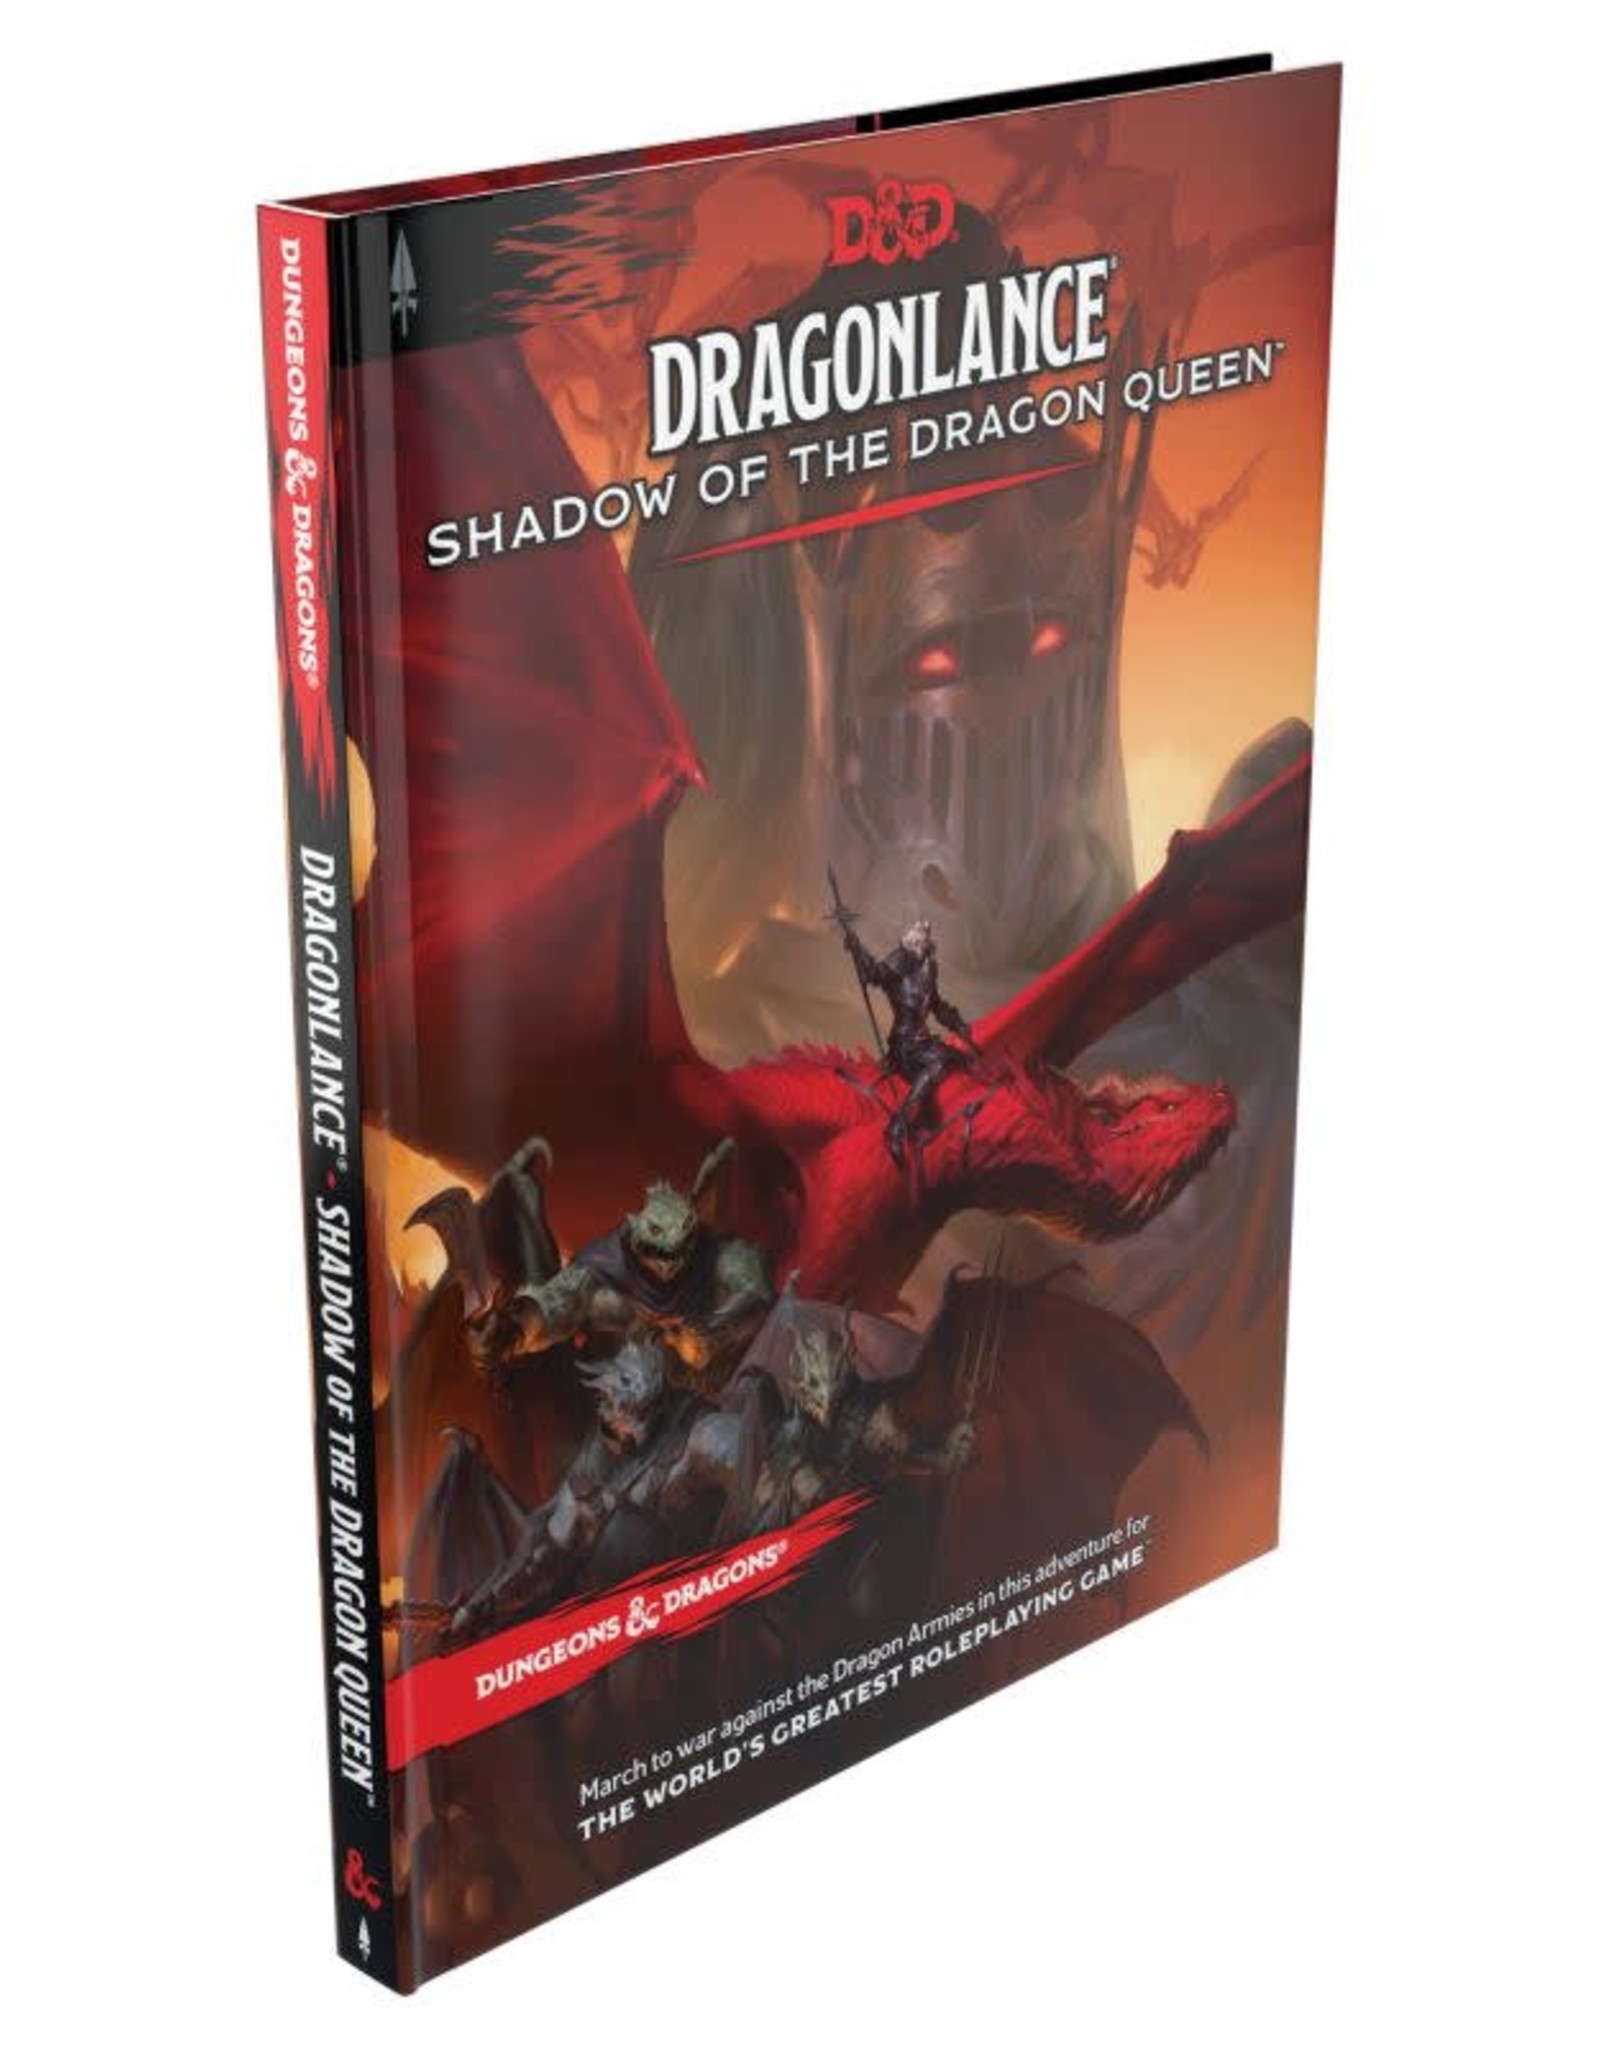 Dungeons & Dragons Dragonlance: Shadow of the Dragon Queen